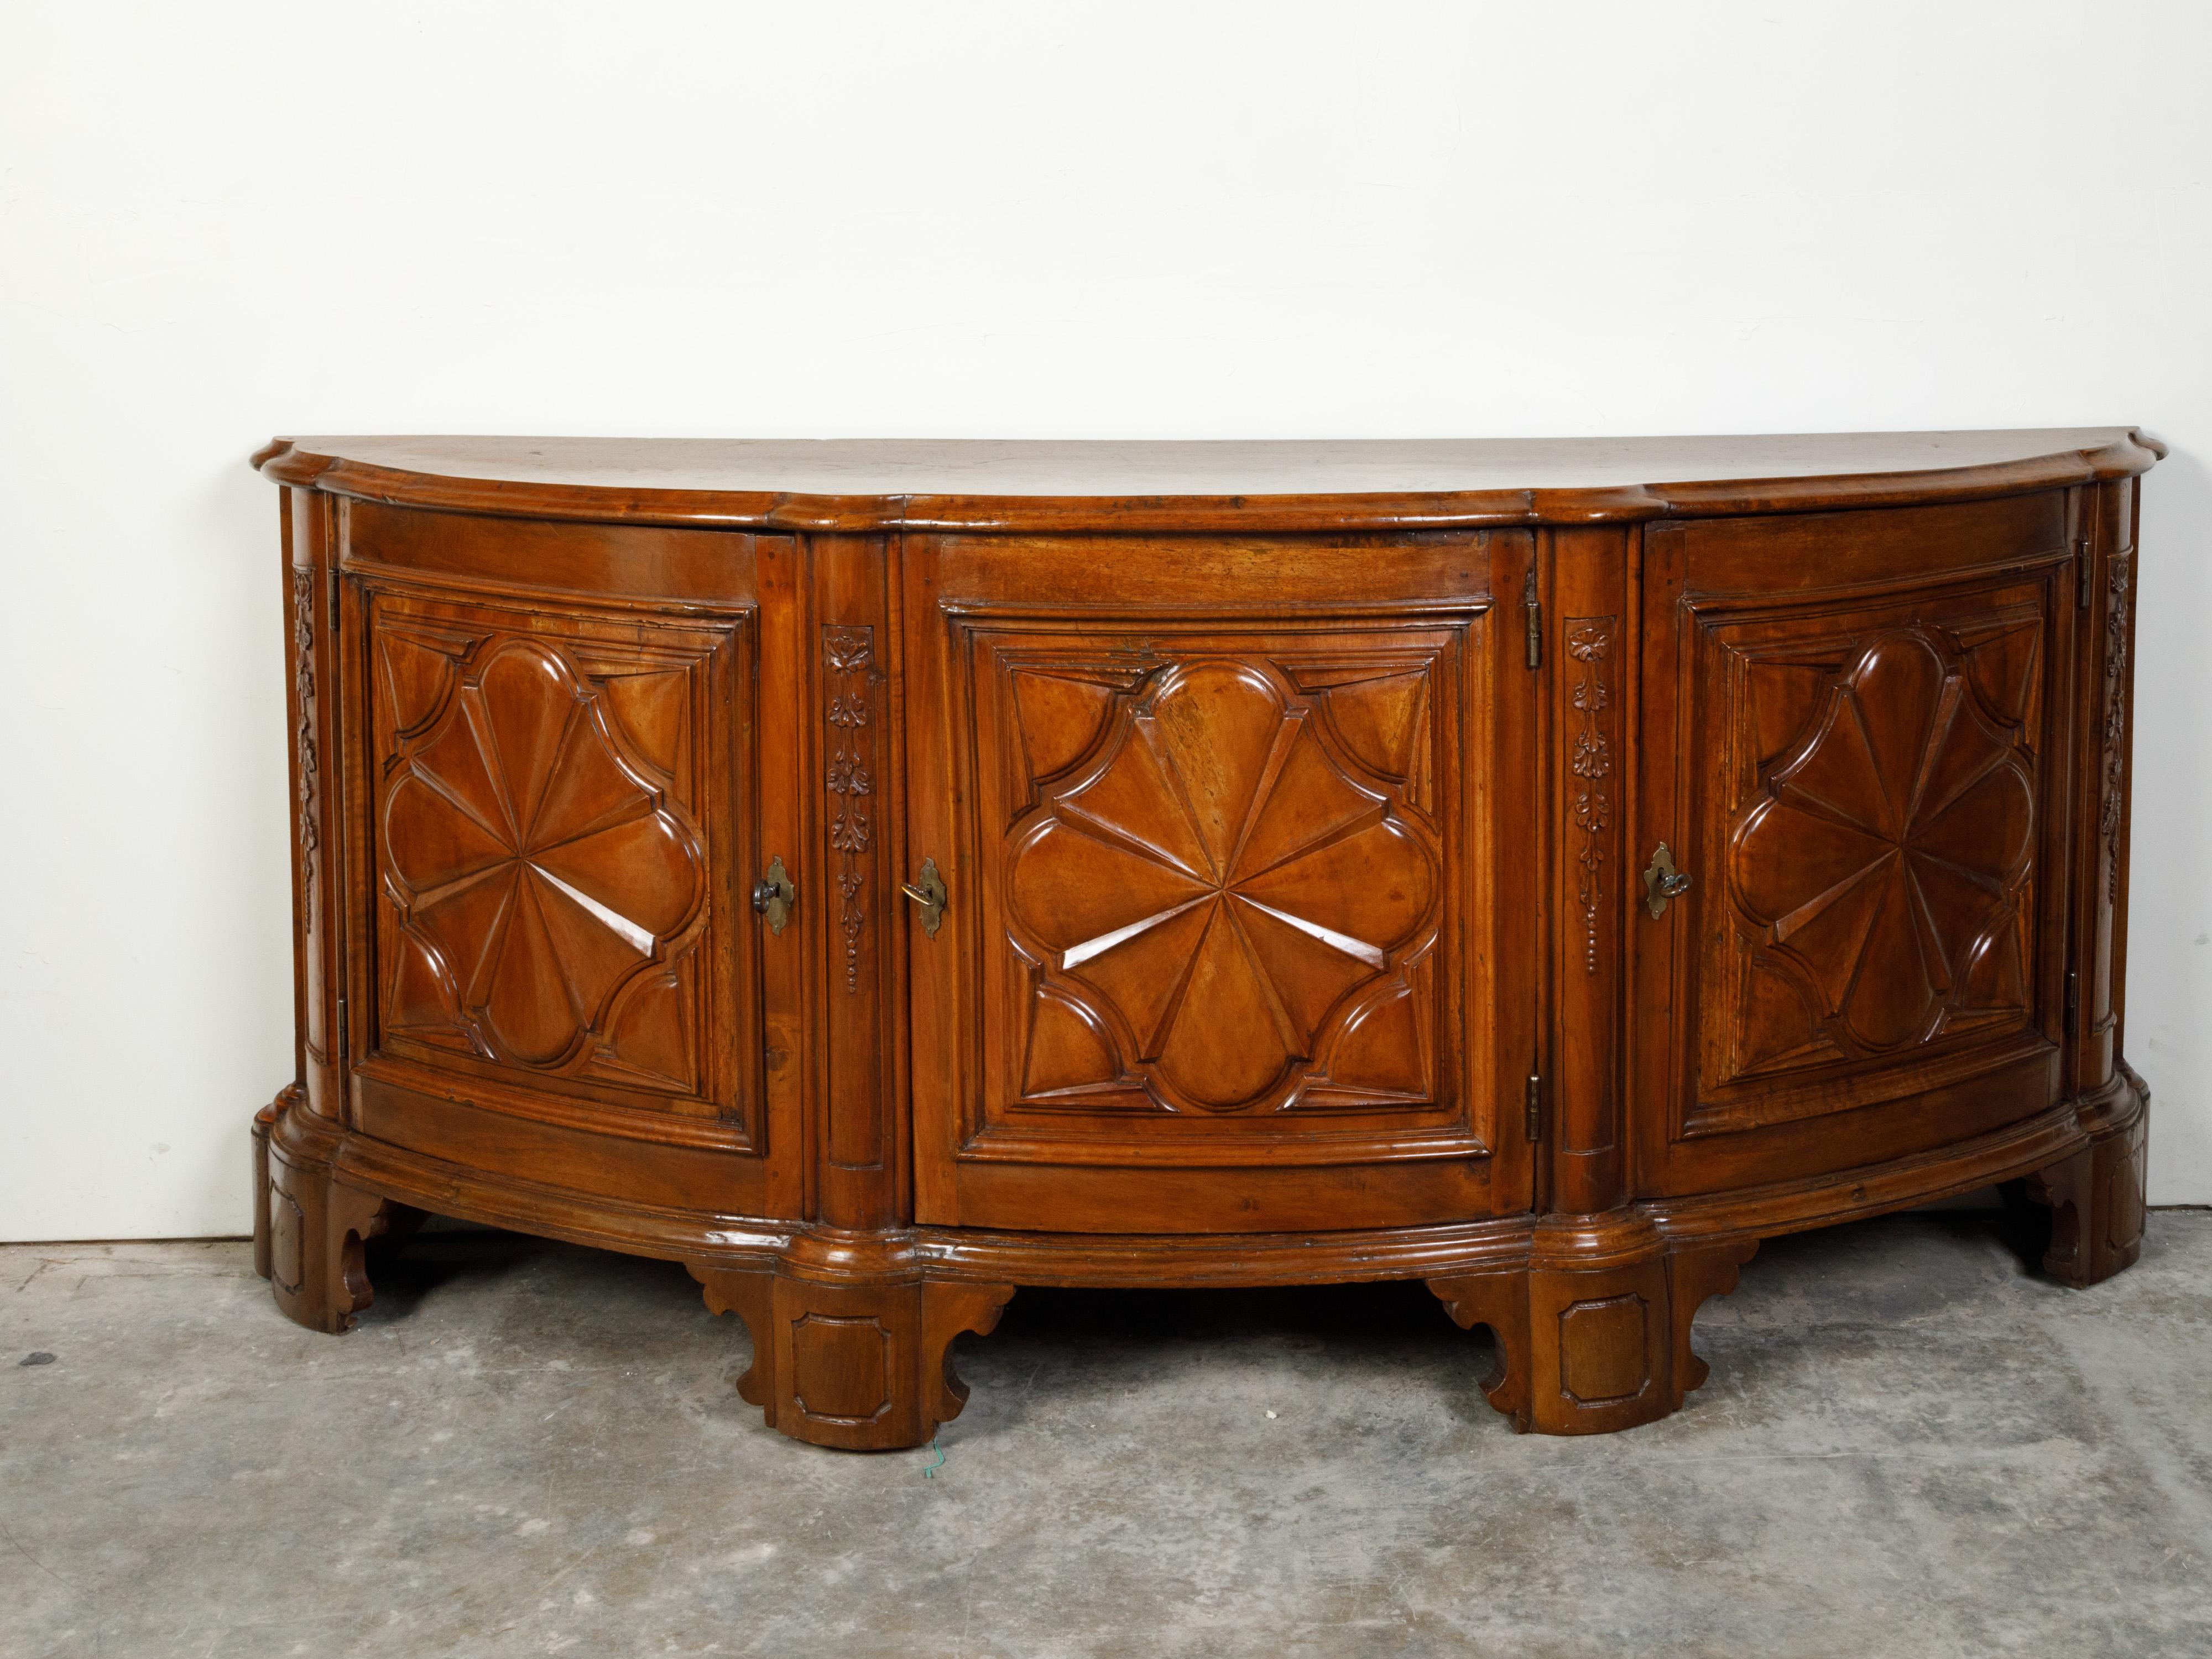 An Italian walnut demilune credenza from the 18th century, with carved panels and three doors. Created in Italy during the 18th century, this walnut credenza features a semi-circular top sitting above three doors, beautifully adorned with carved